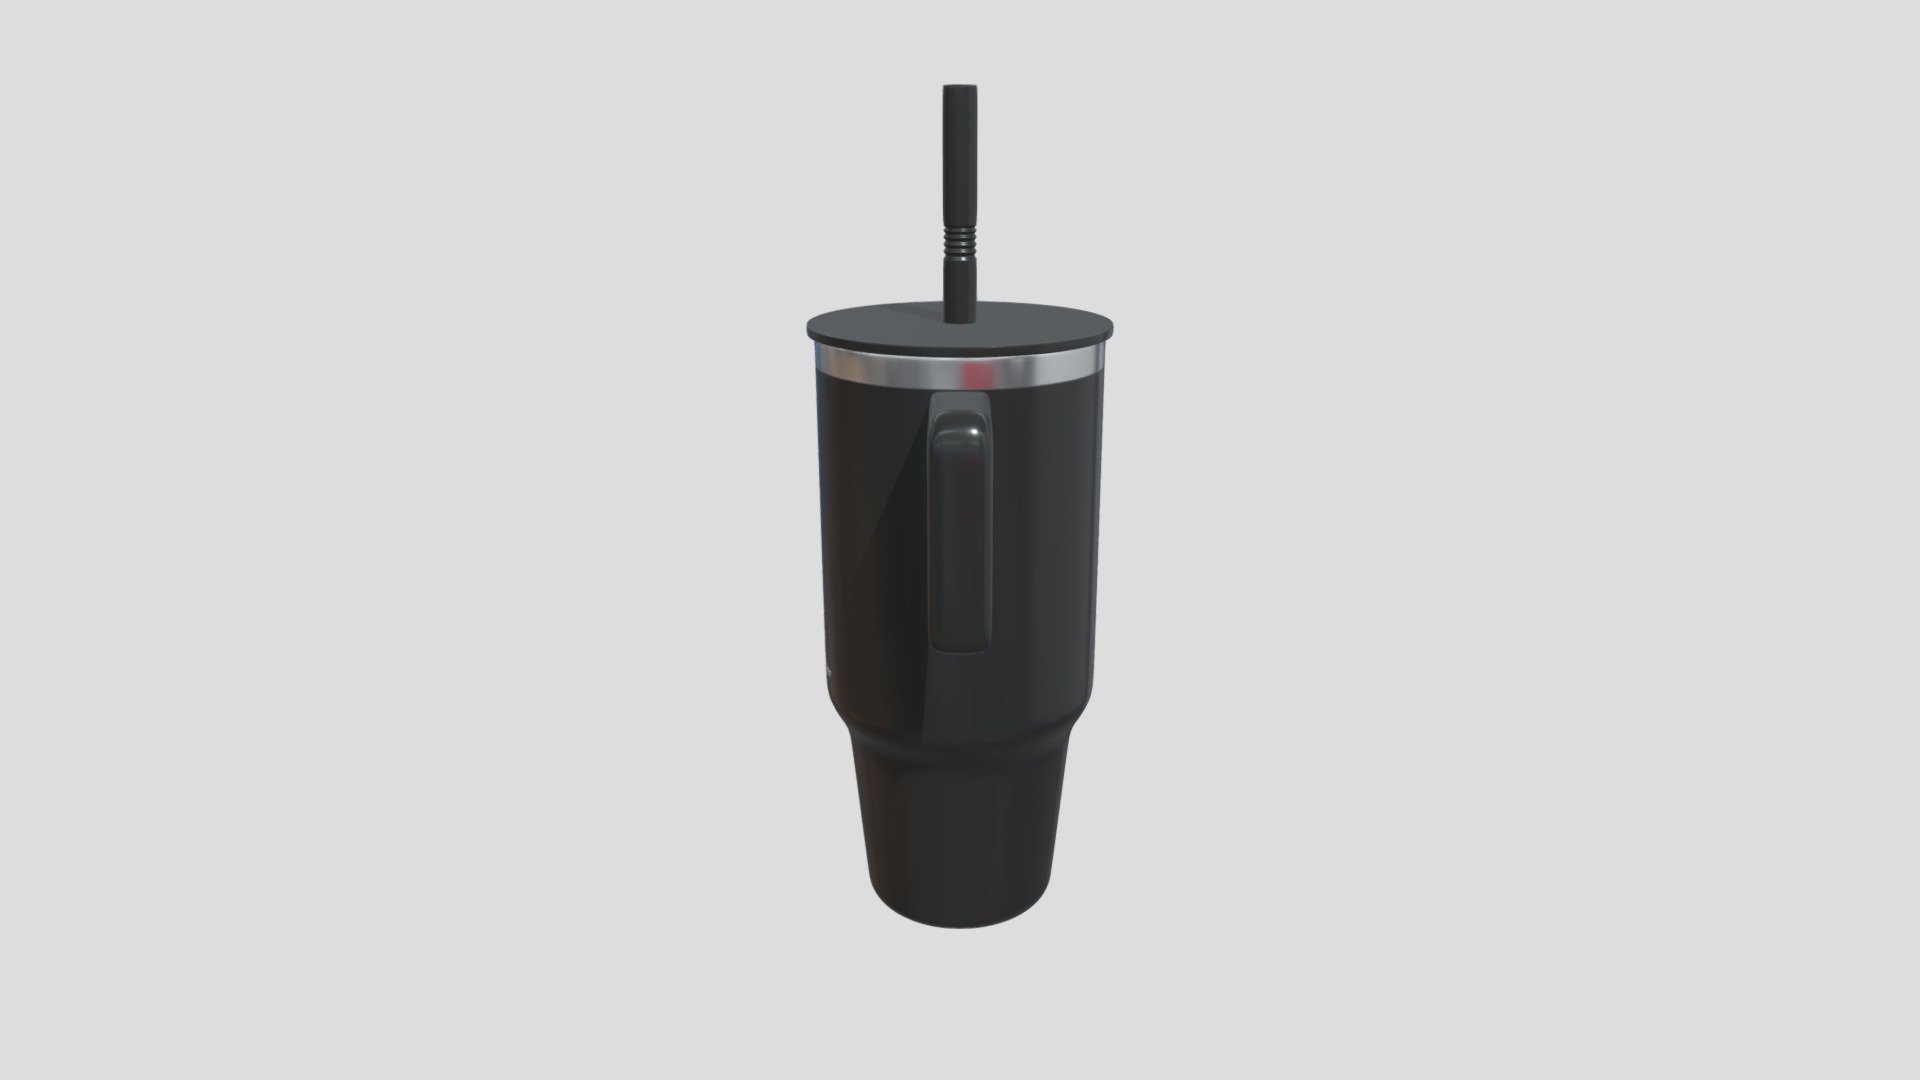 Just a simple tumbler. You can use it for personal or commercial purposes after I publish it 3d model